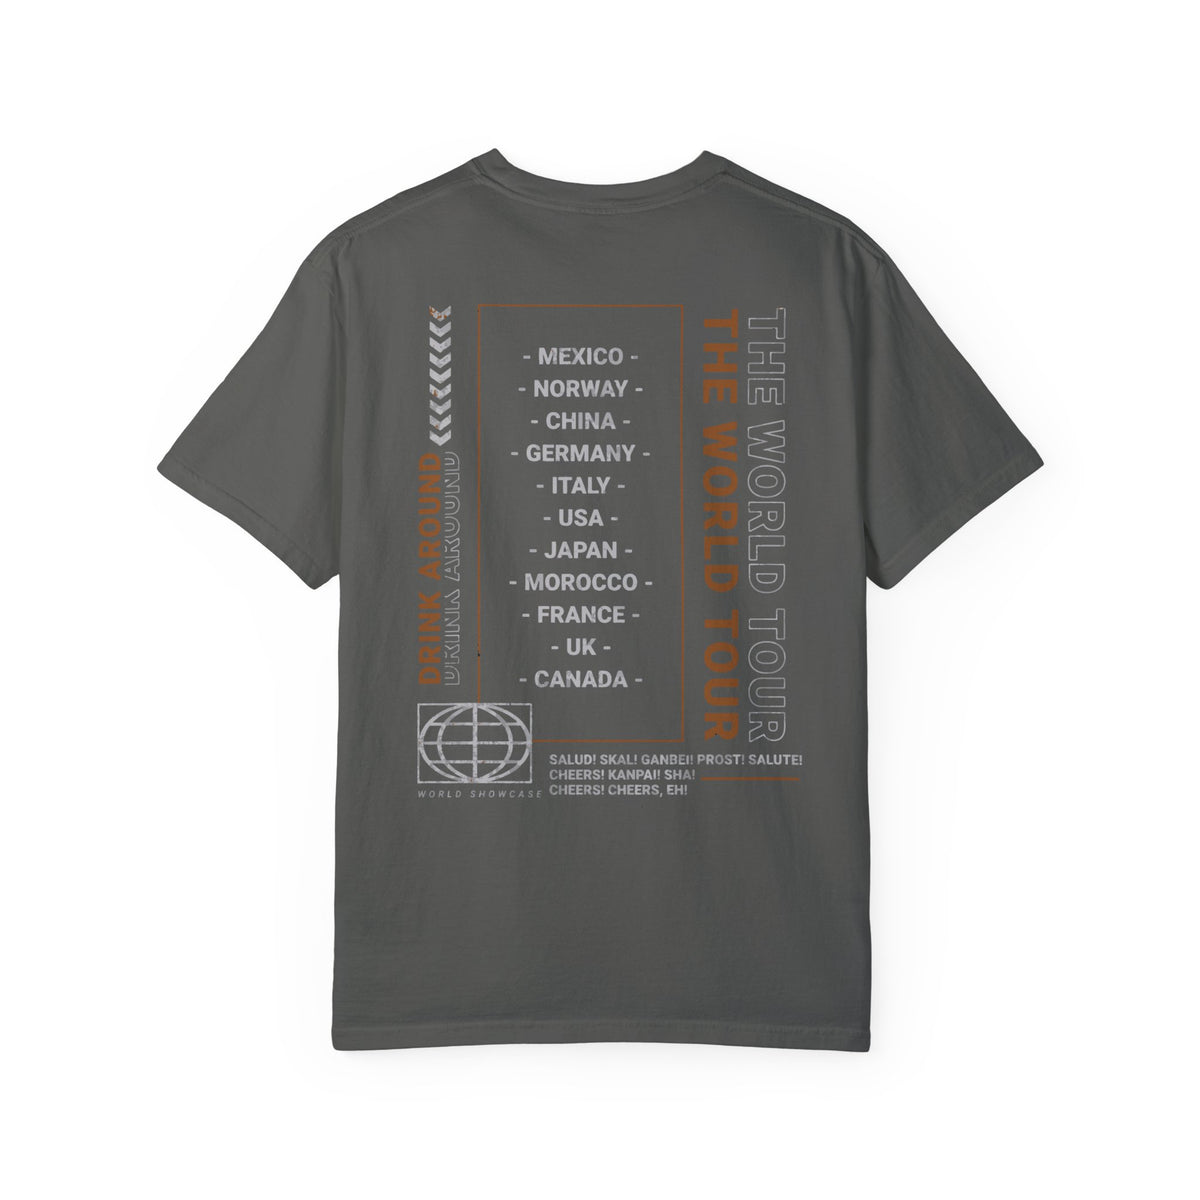 Drink Around The World Tour Comfort Colors Unisex Garment-Dyed T-shirt